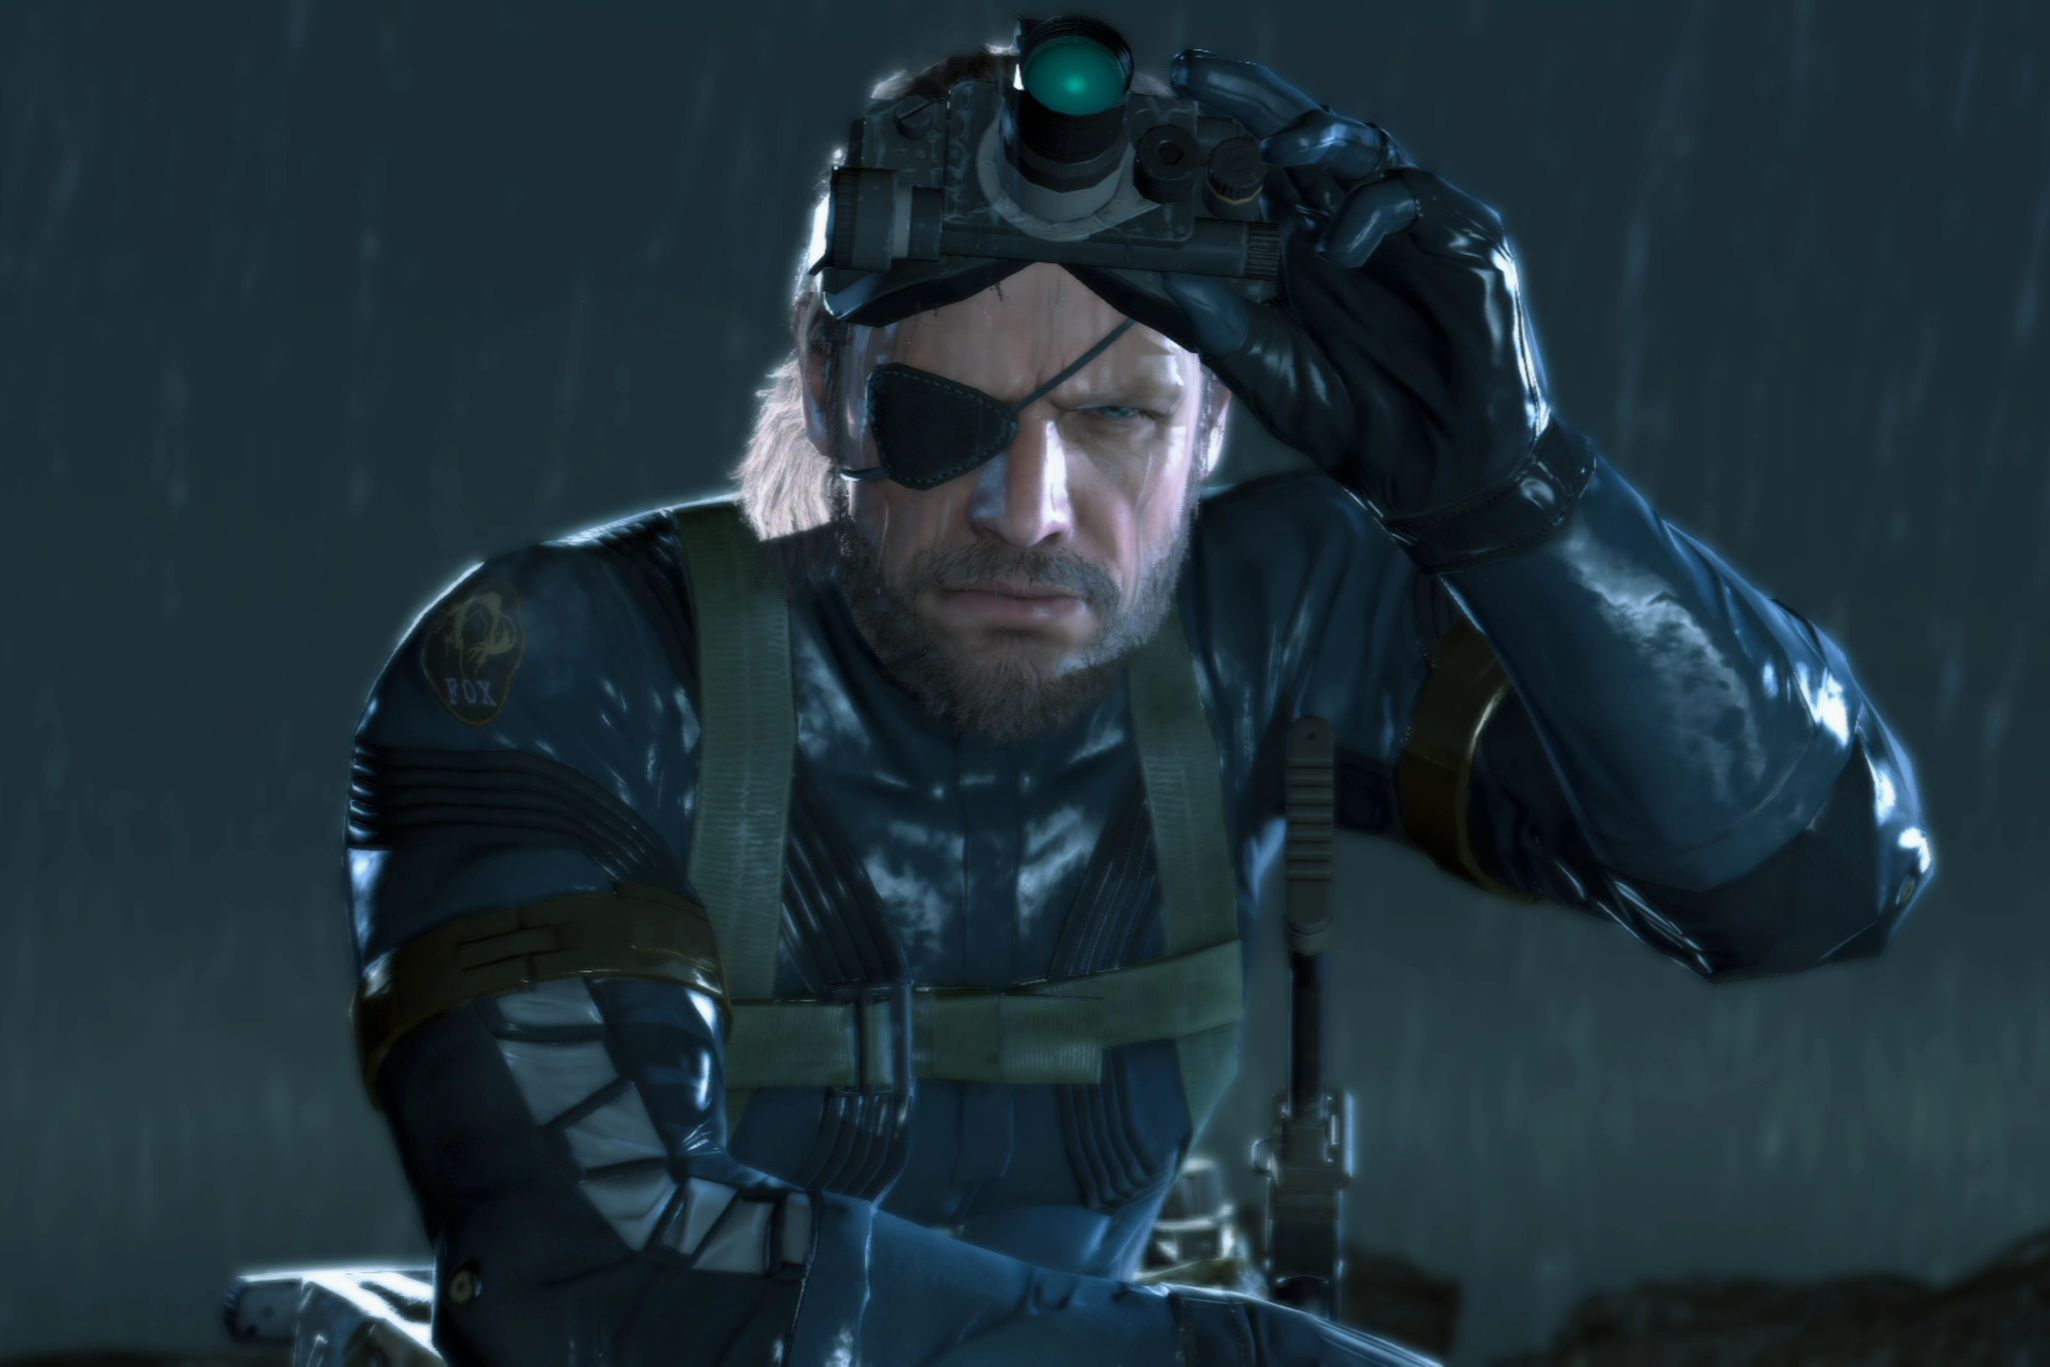 Ground Zeroes' is a brief glimpse at the dark new future of 'Metal Gear Solid'